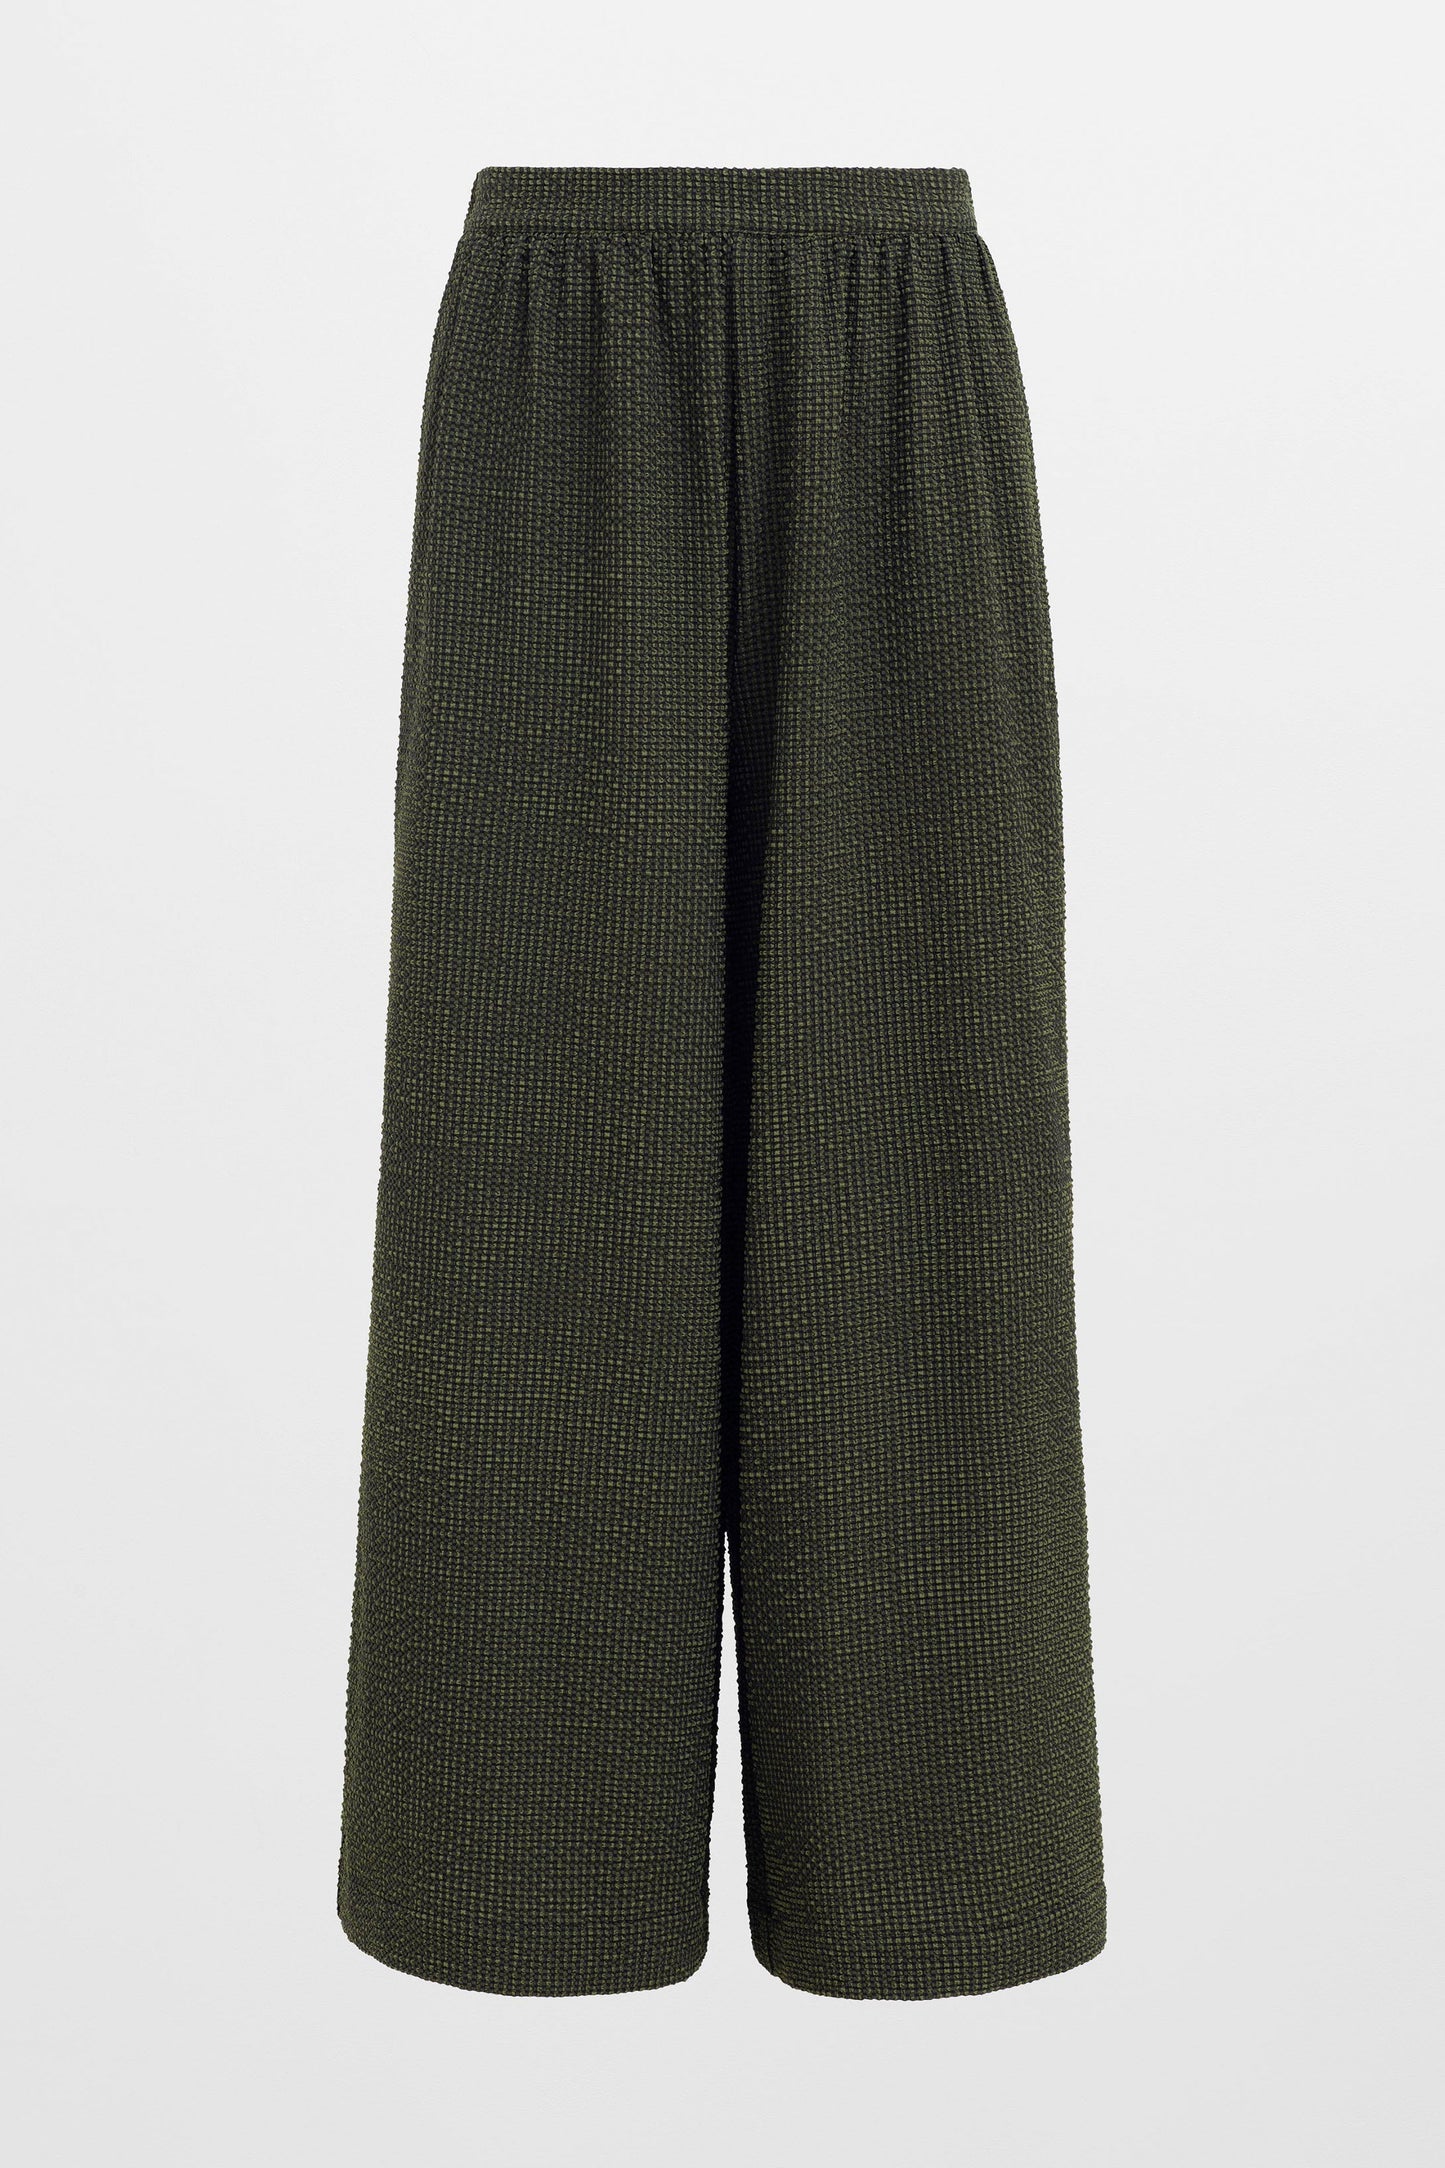 Bubbel Textured Seersucker-like Wide Leg Pant  Front | OLIVE CHECK